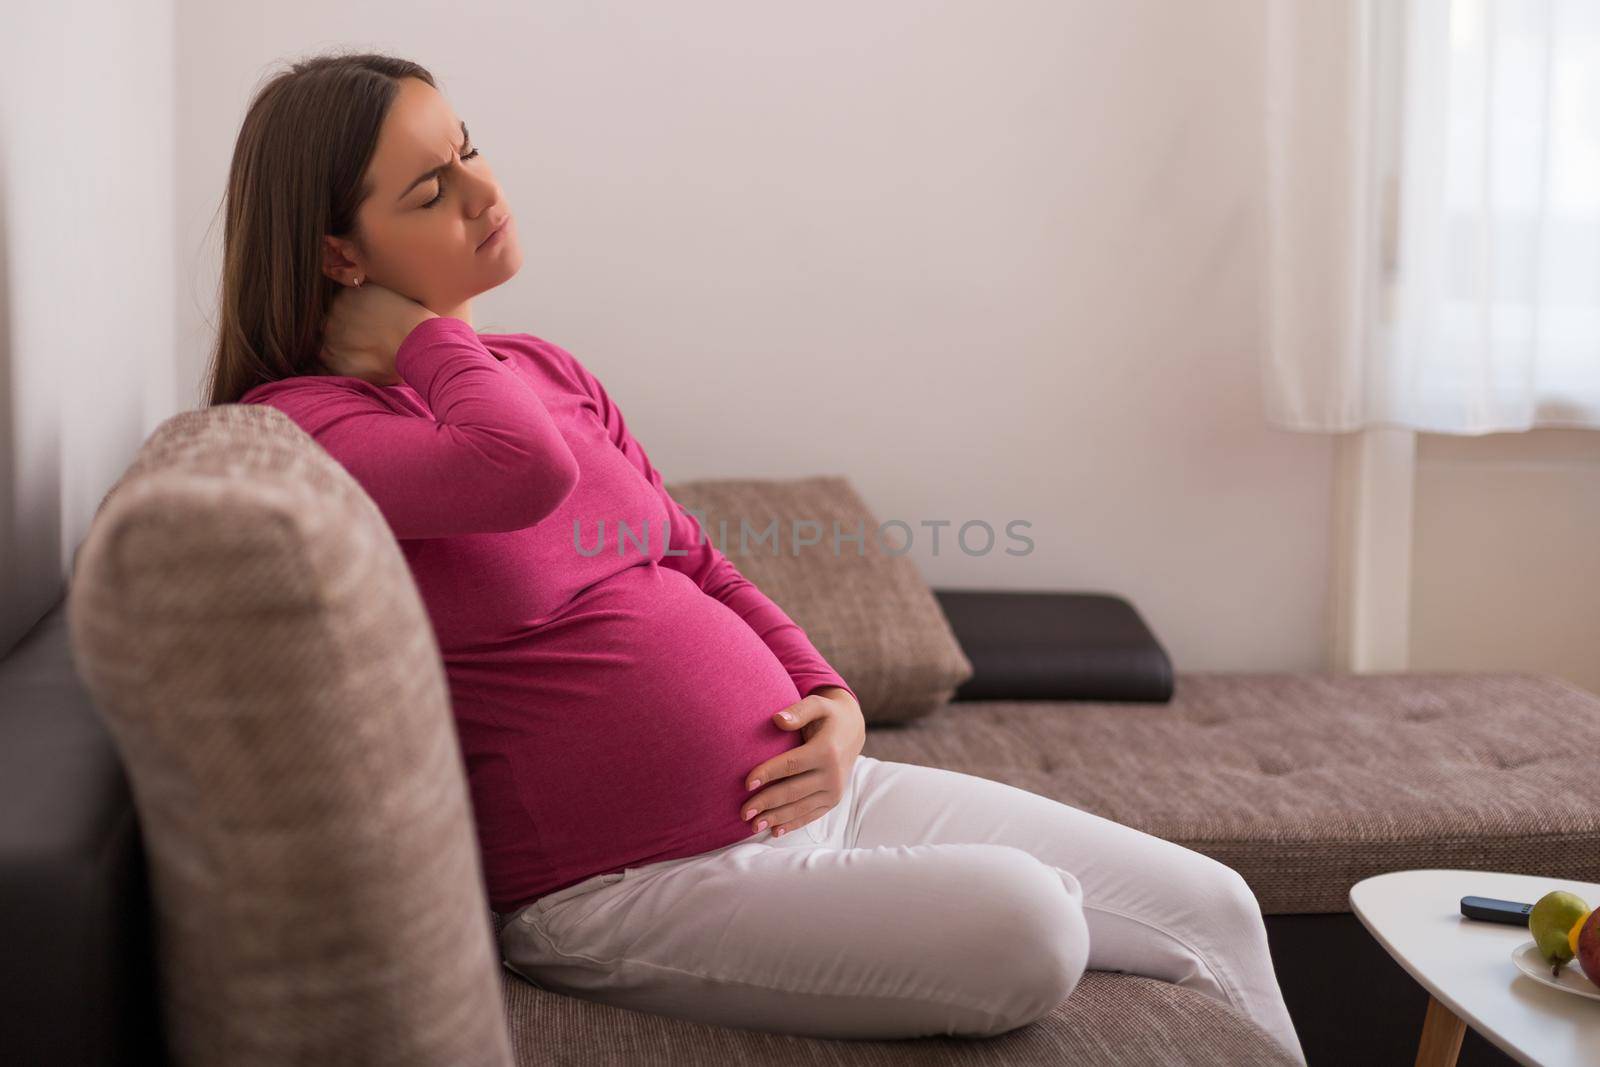 Pregnant woman having neck pain while spending time at her home.